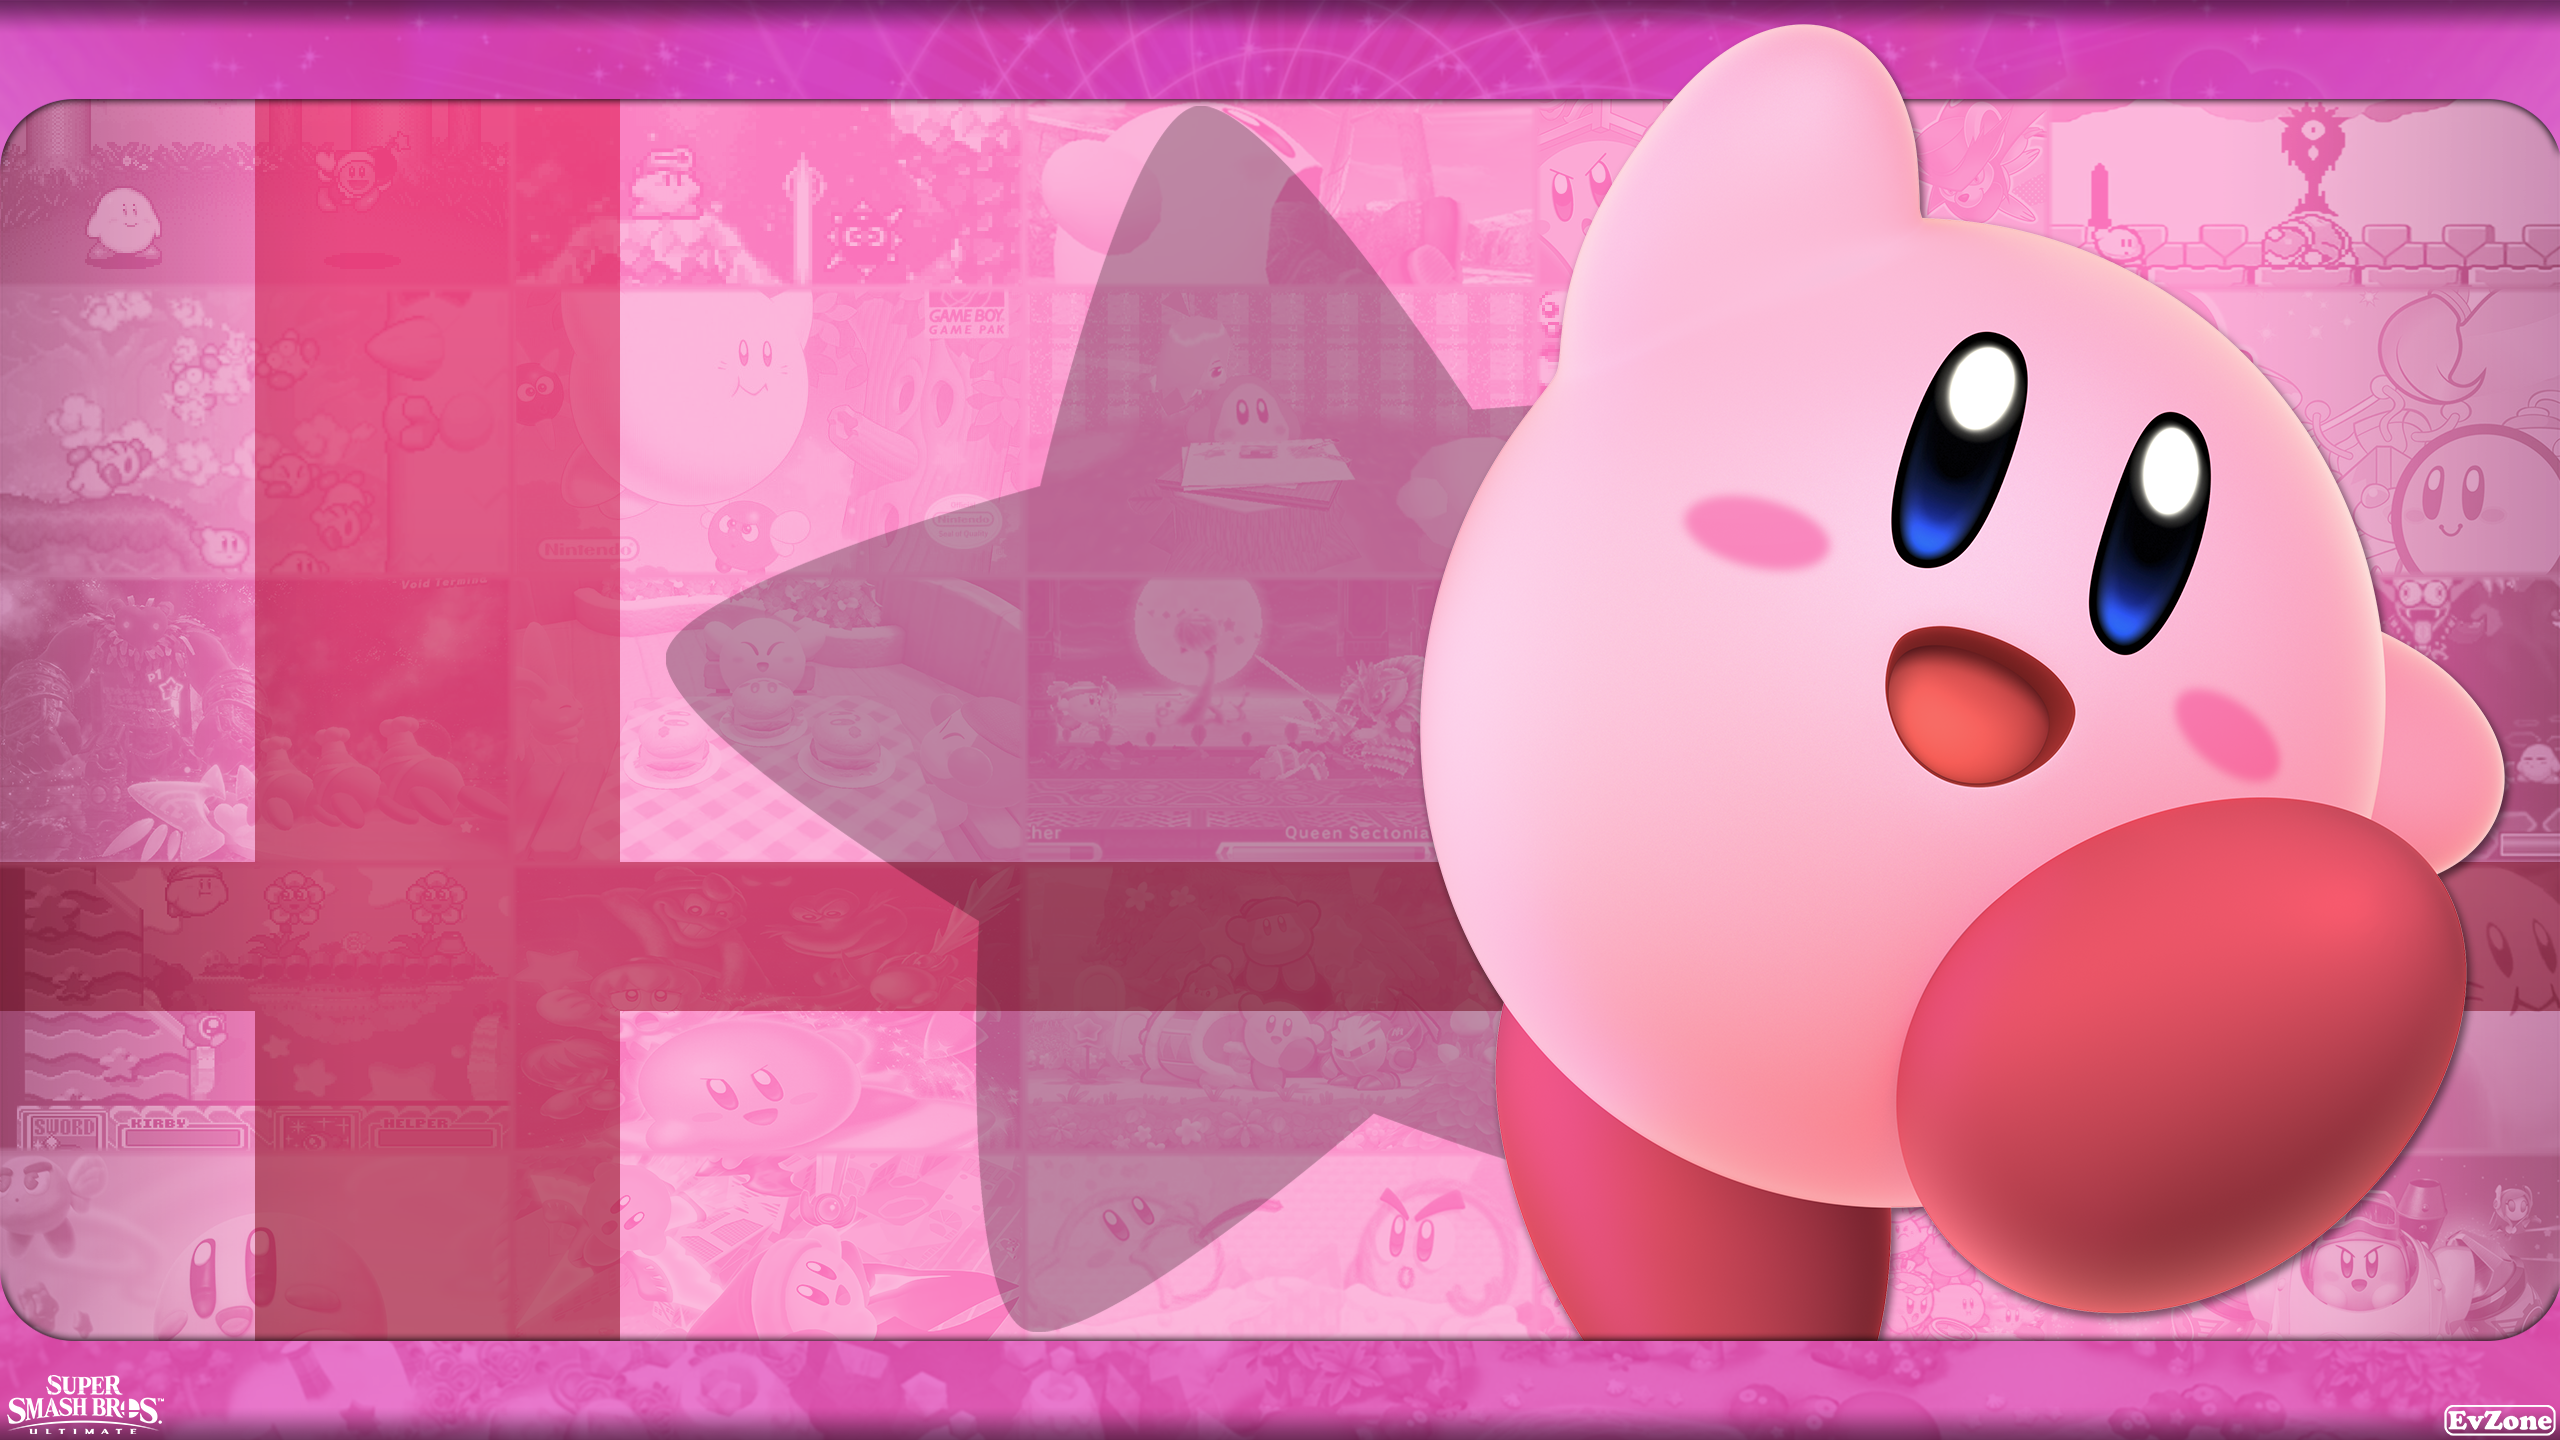 General 2560x1440 Kirby Super Smash Bros. Ultimate Nintendo pink background Super Smash Brothers video games digital art watermarked video game characters pink open mouth